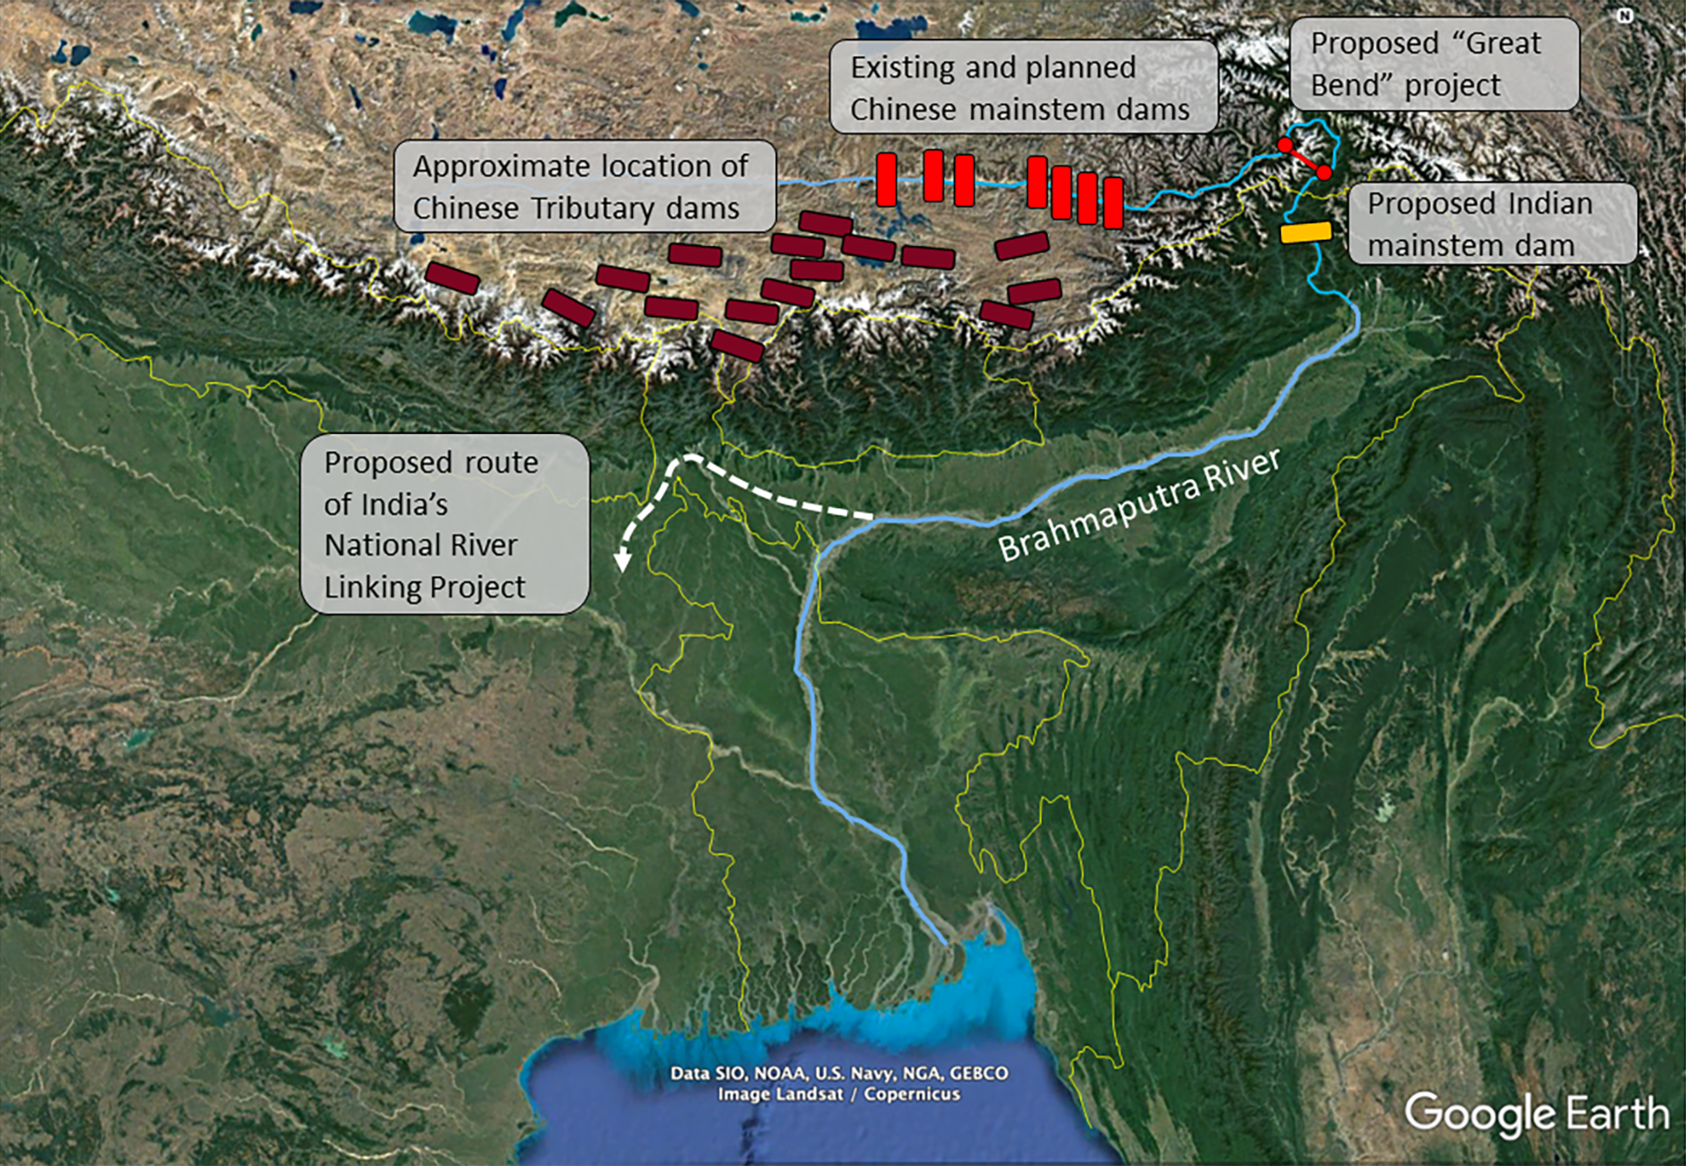 Existing and planned Infrastructure on the Brahmaputra